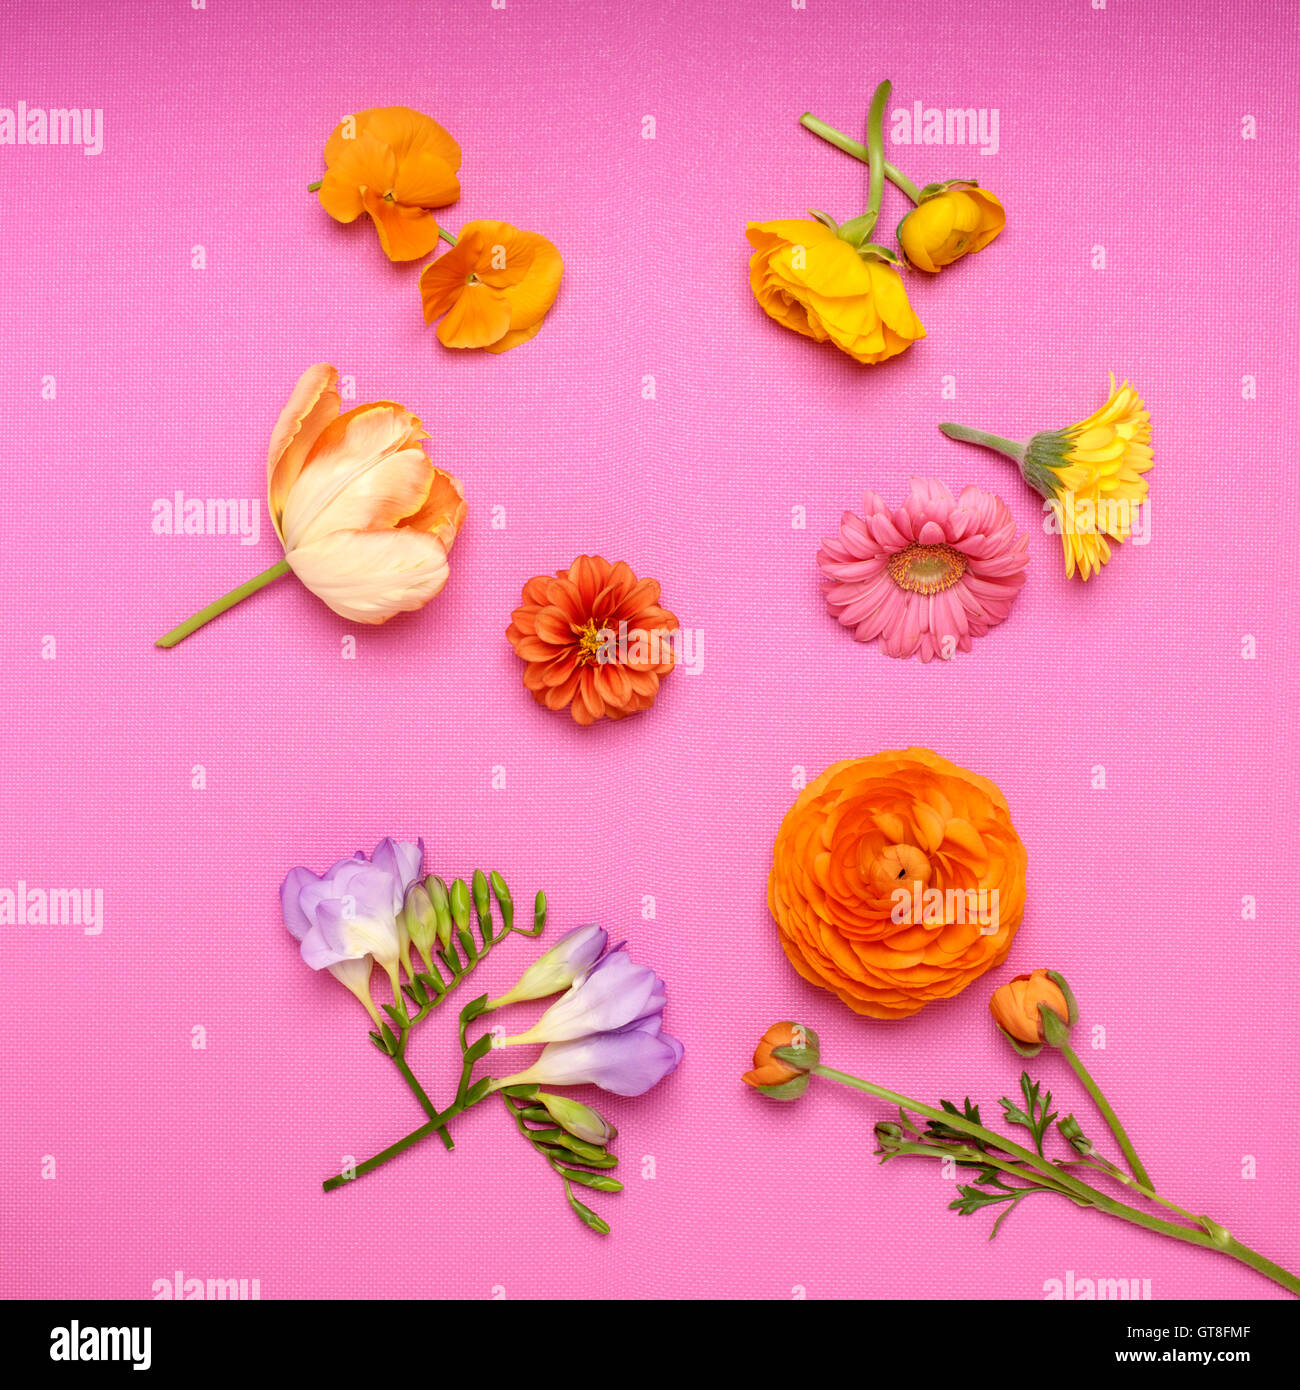 Variety of Cut Flowers on Bright Pink Background Stock Photo